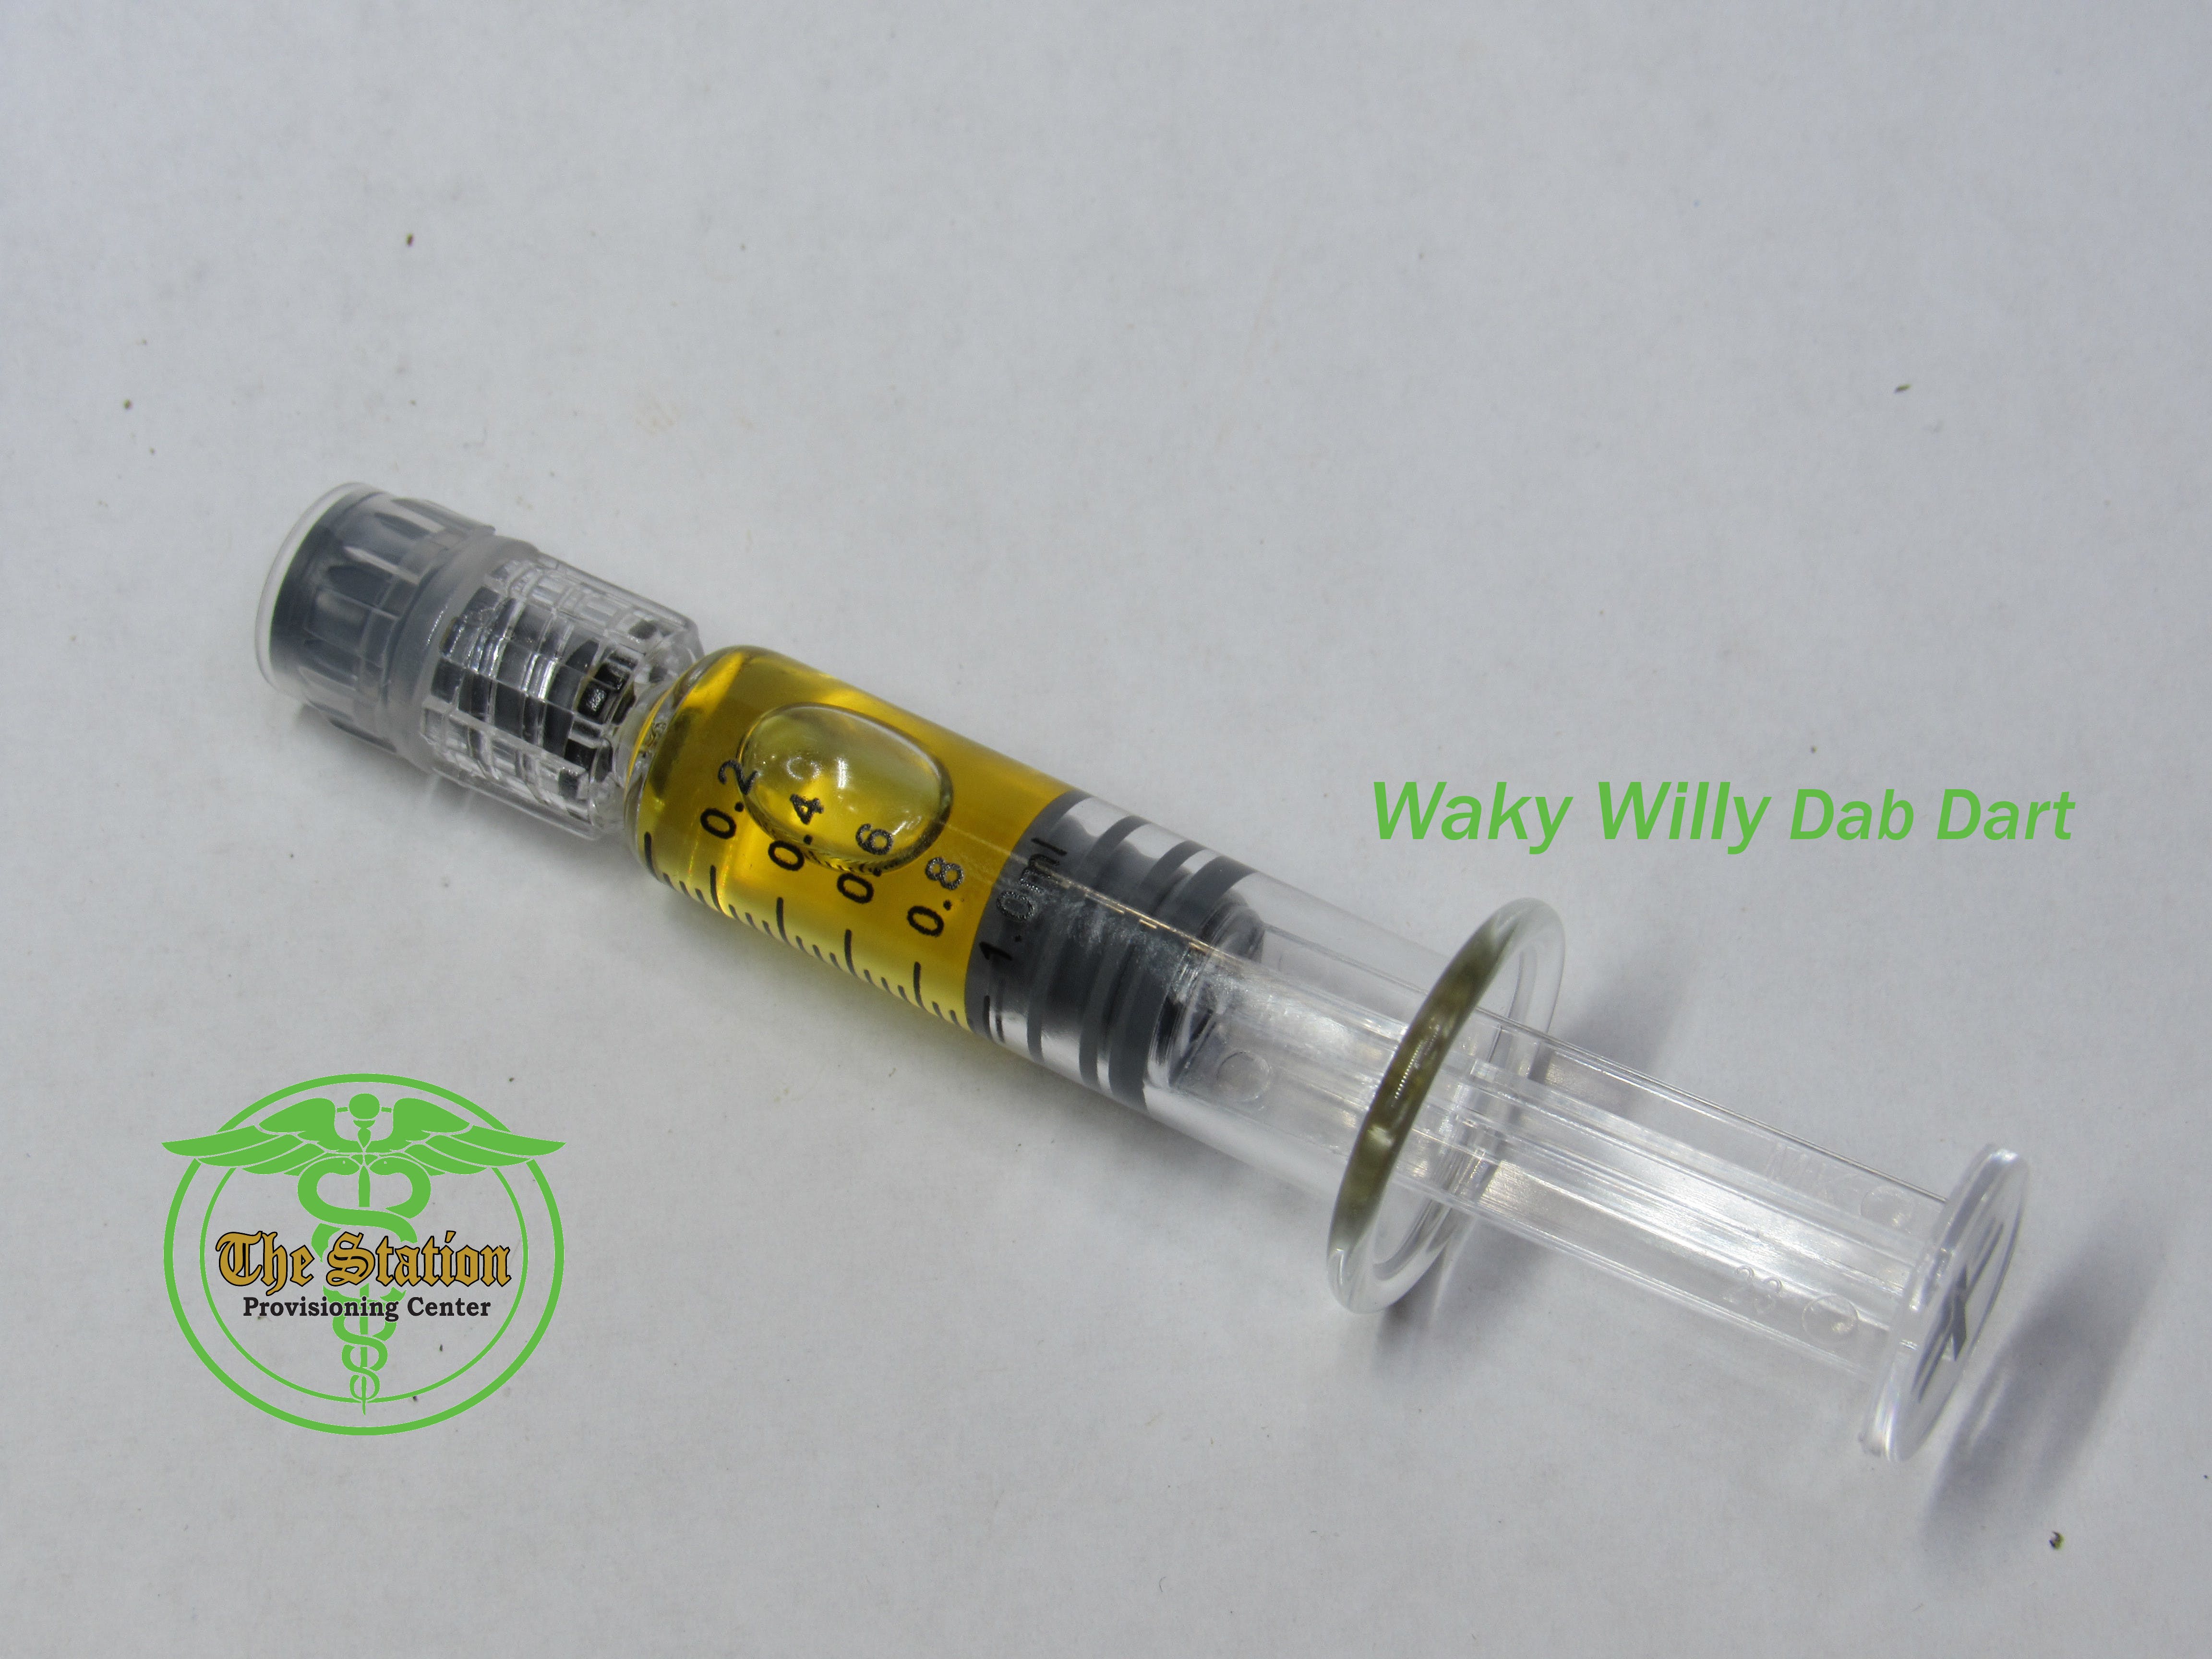 concentrate-waky-willy-1g-dab-darts